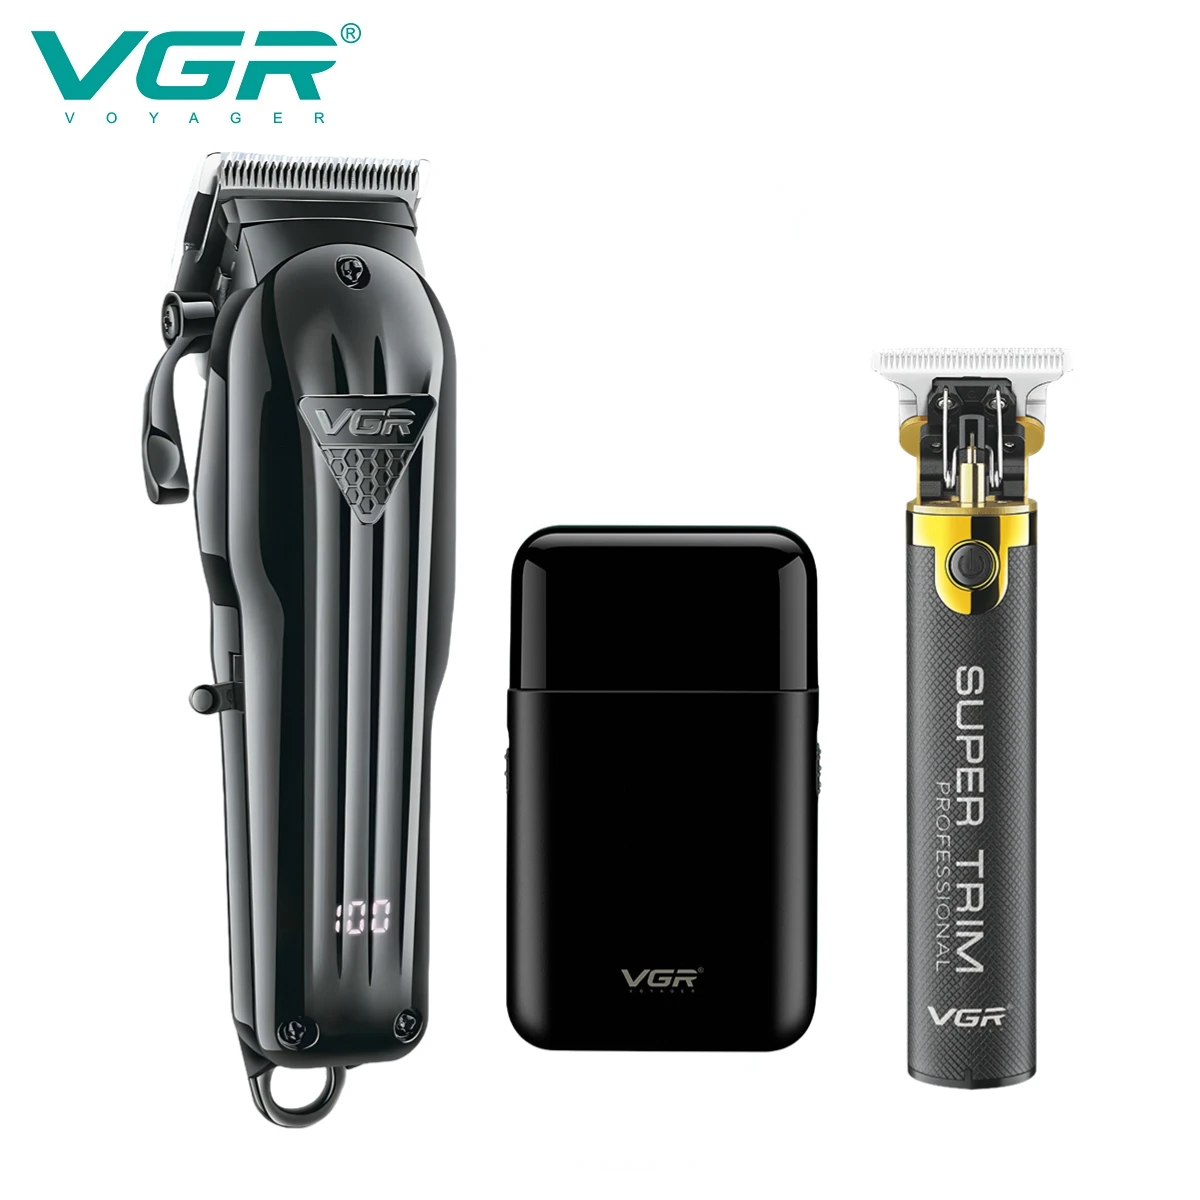 VGR Hair Clipper Professional Hair Trimmer Electric Face Shaver Rechargeable Hair Cutting Machine 0mm Barber Trimmer Set for Men